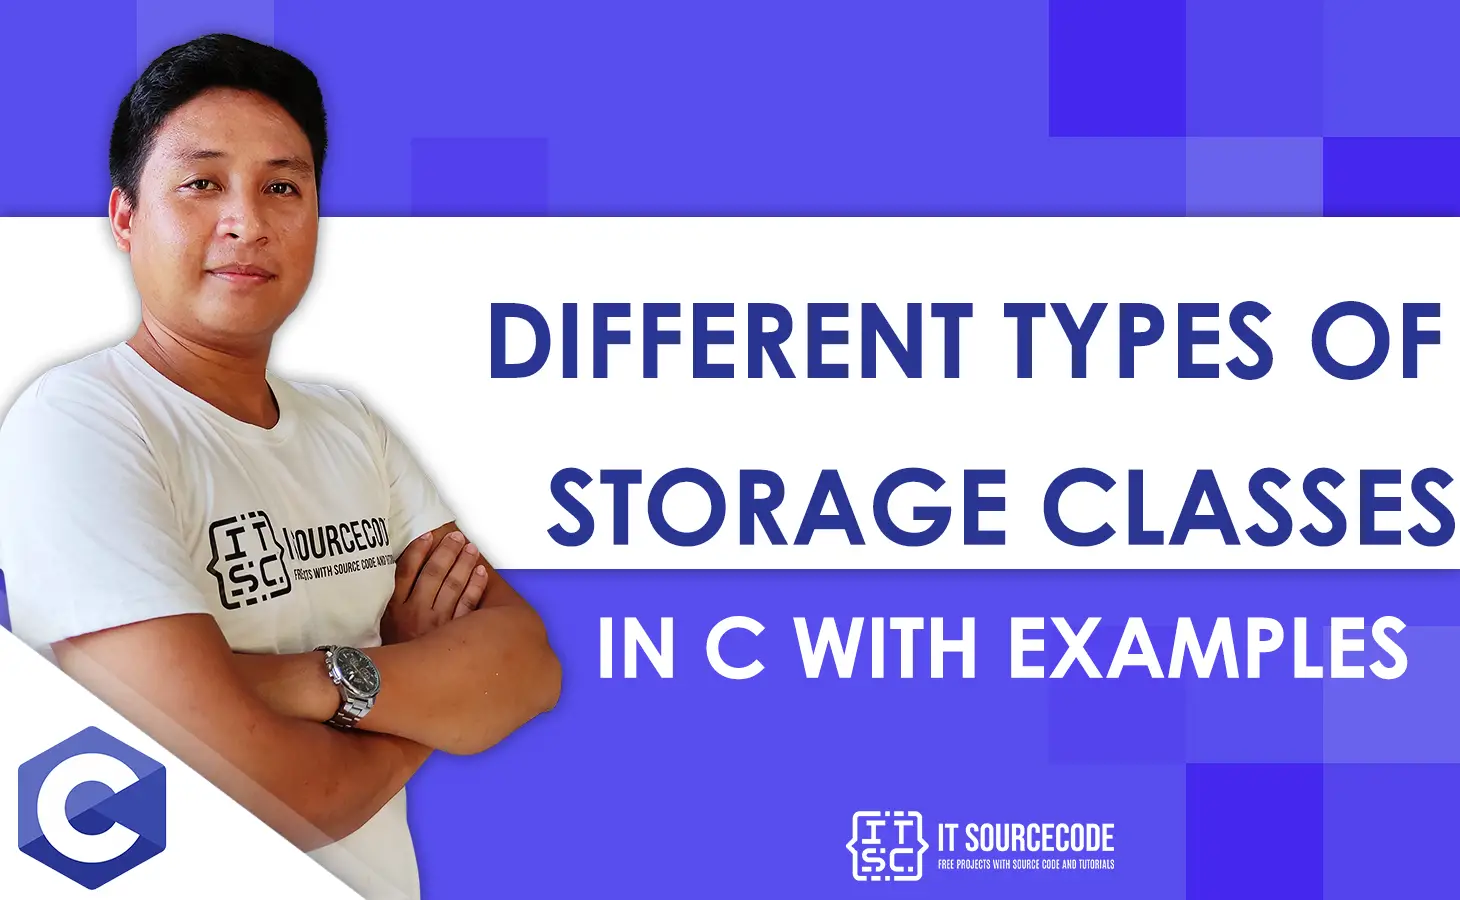 Different Types of Storage Classes in C with Examples